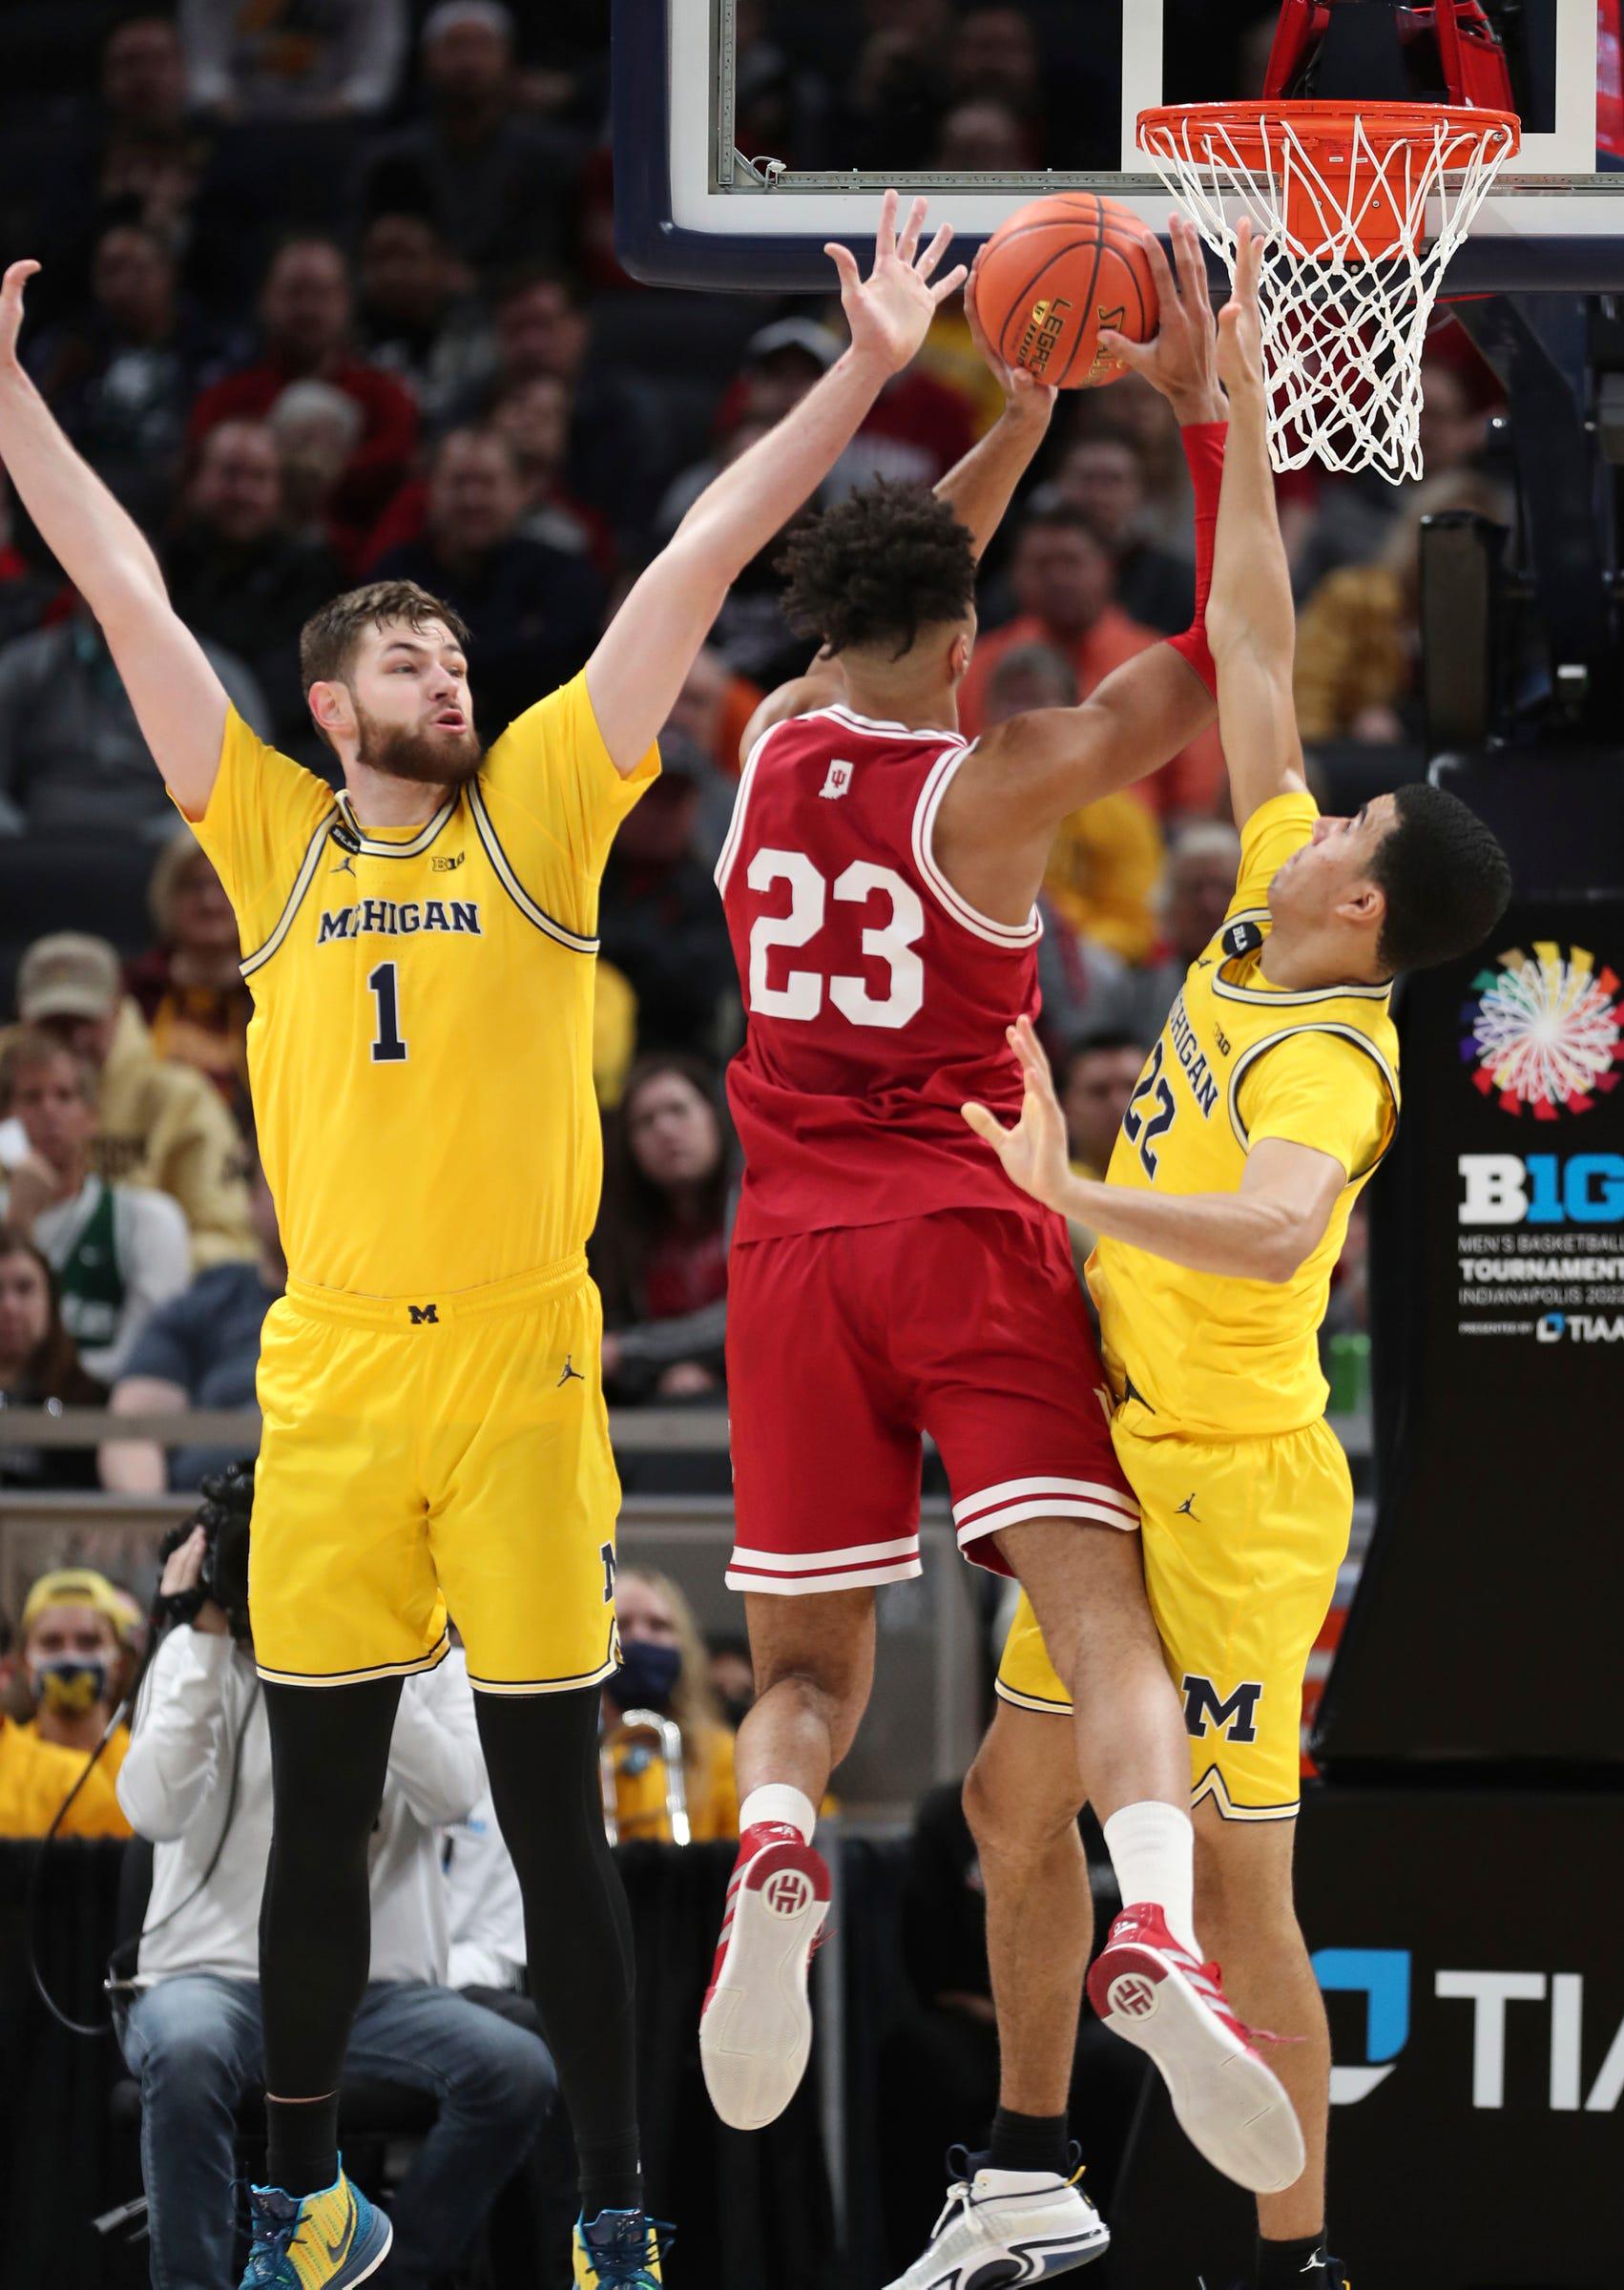 Michigan March Madness Schedule: Next Game Time, Date, TV Channel for 2022 NCAA Basketball Tournament